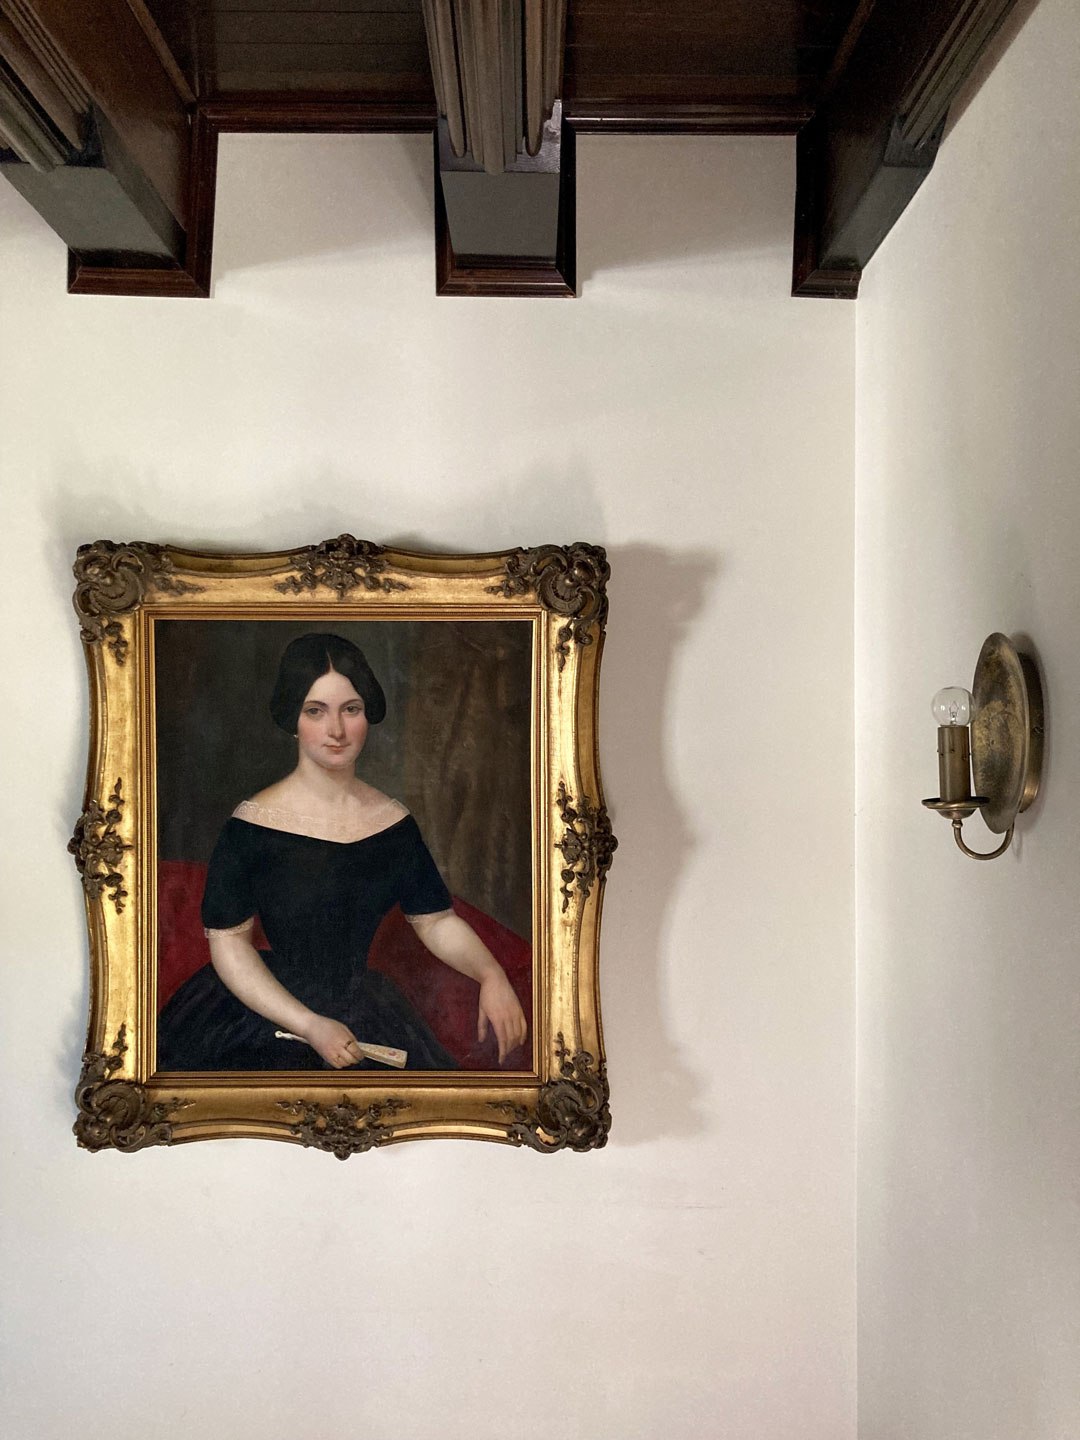 The framed portrait on display - 19th Century Portrait and Frame